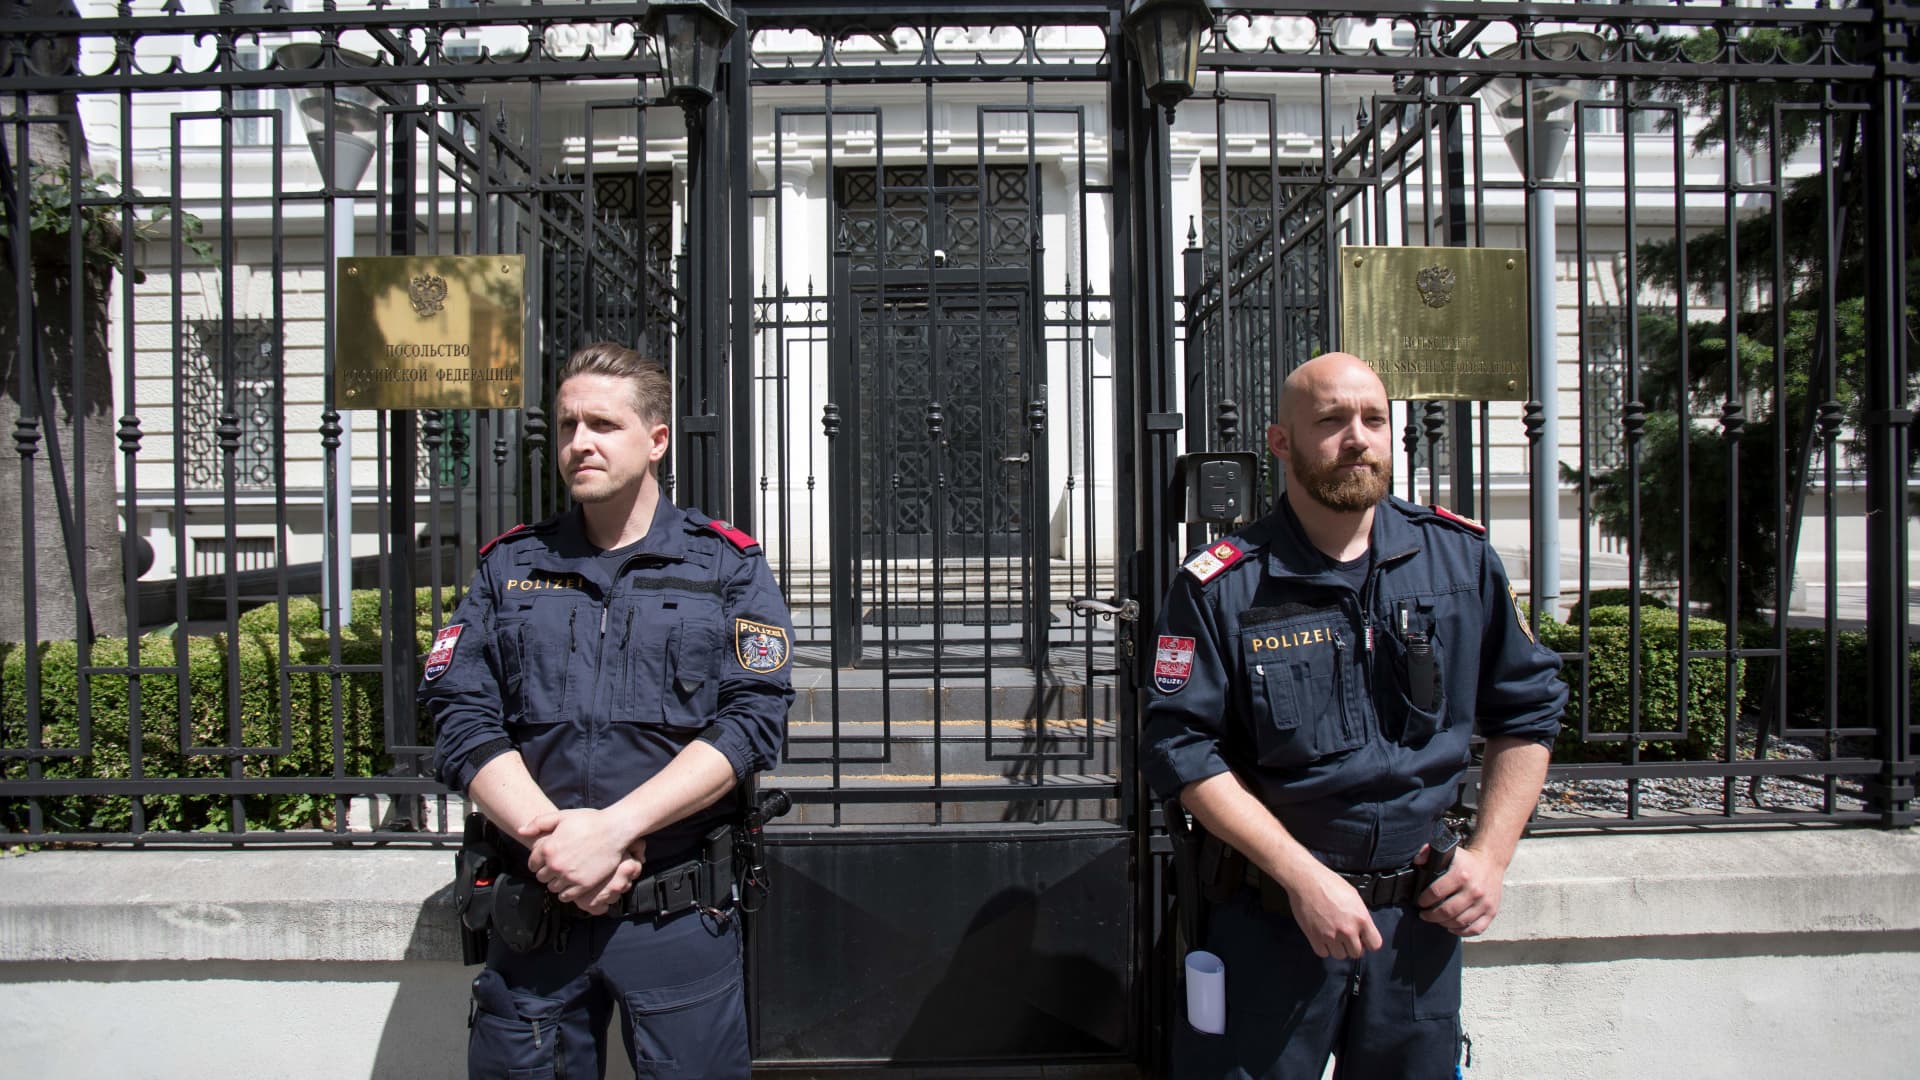 Austrian police stand guard in front of the Russian embassy in Vienna.